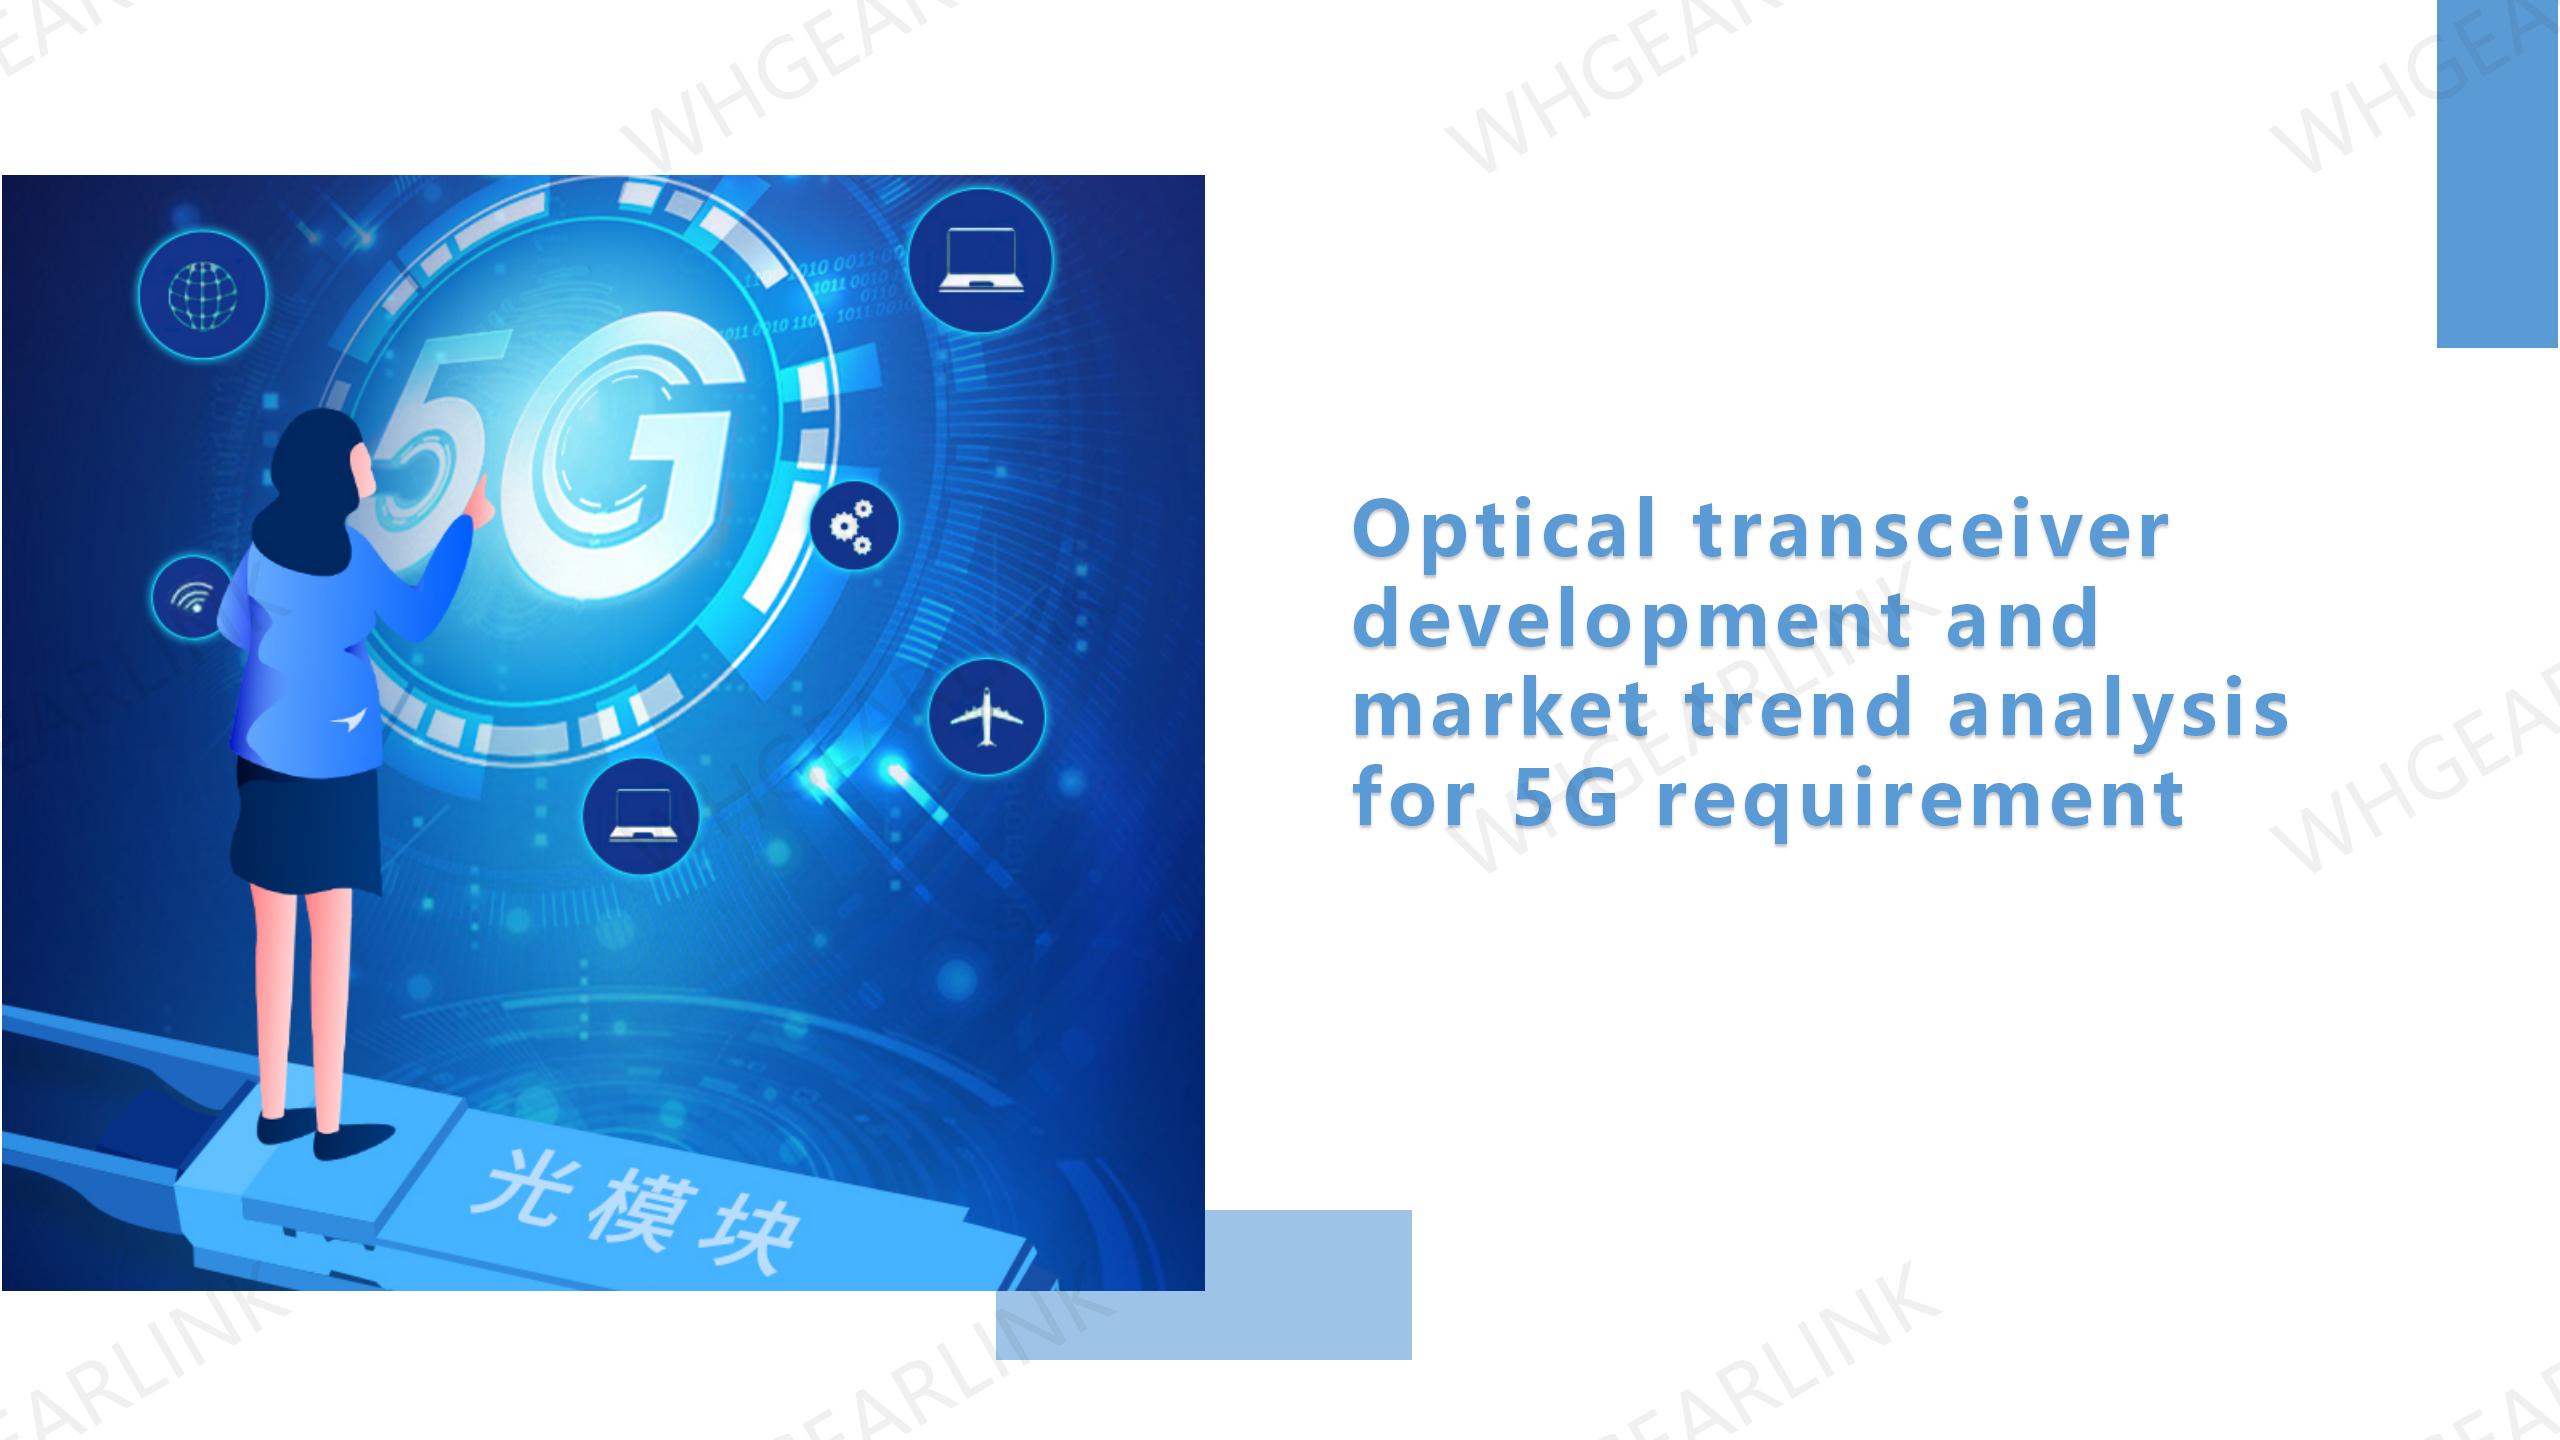 optical-transceiver-development-and-market-trend-analysis-for-5g-requirements.jpg